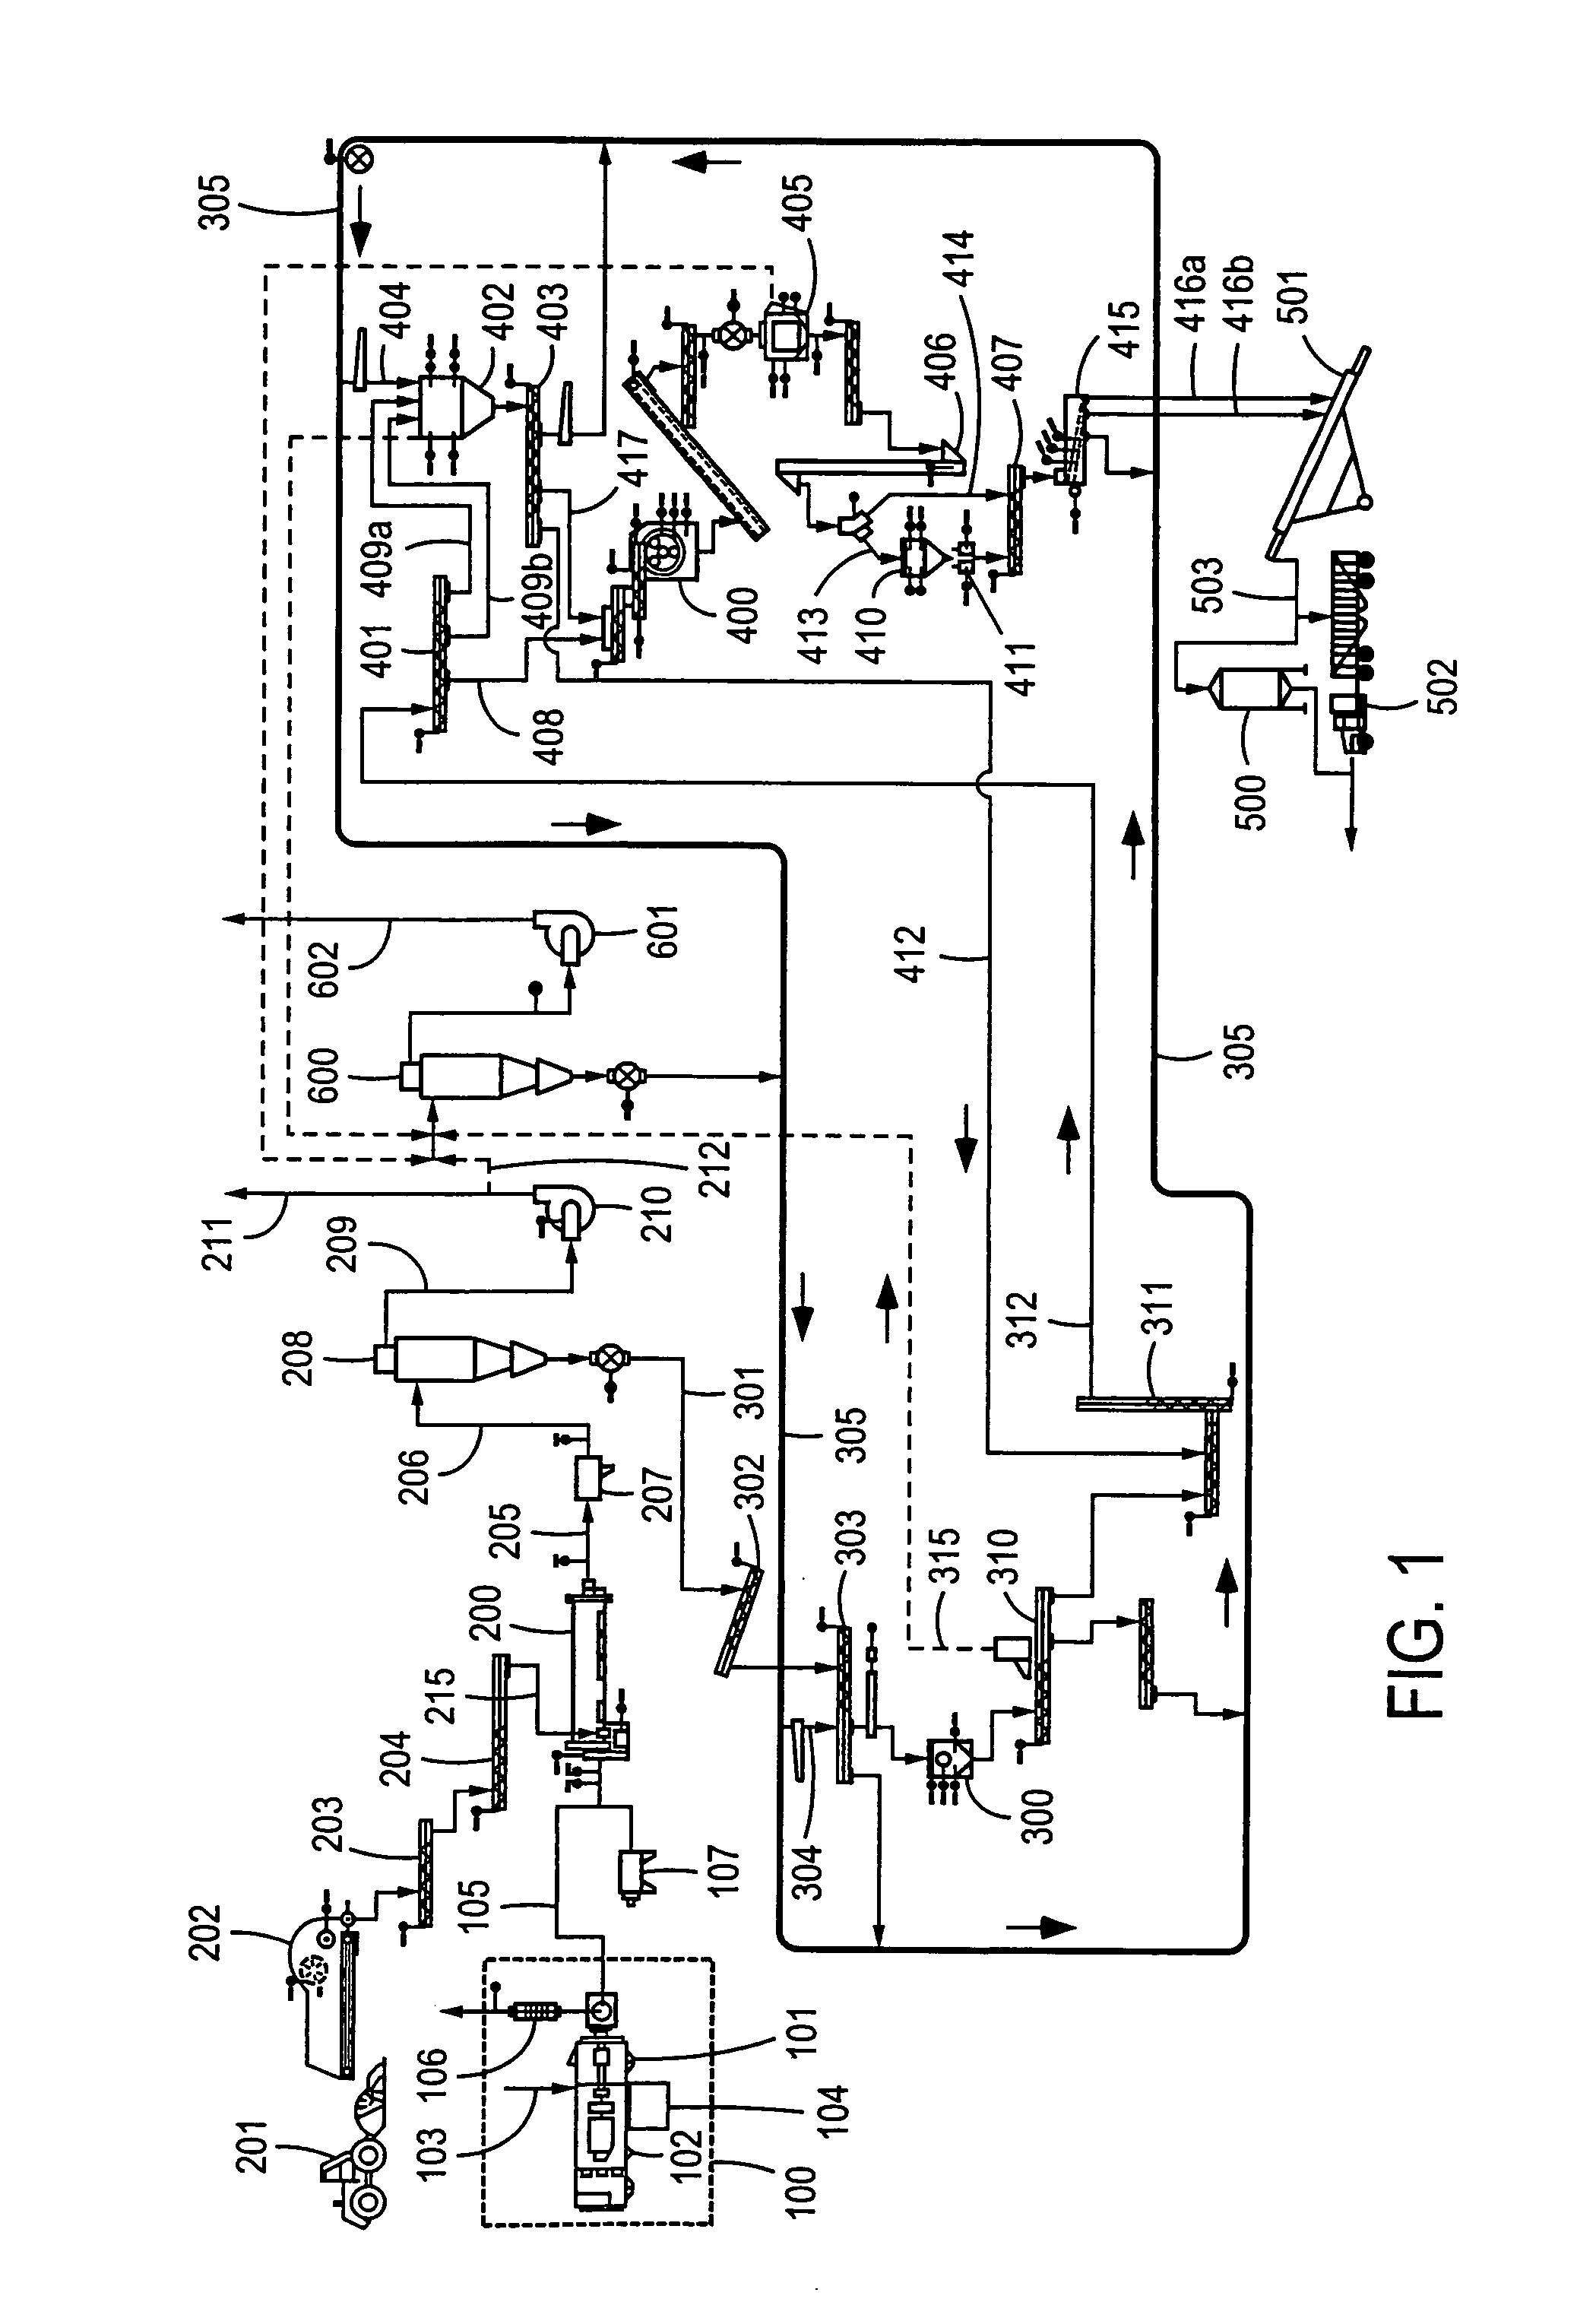 Process and apparatus for manufacture of fertilizer products from manure and sewage